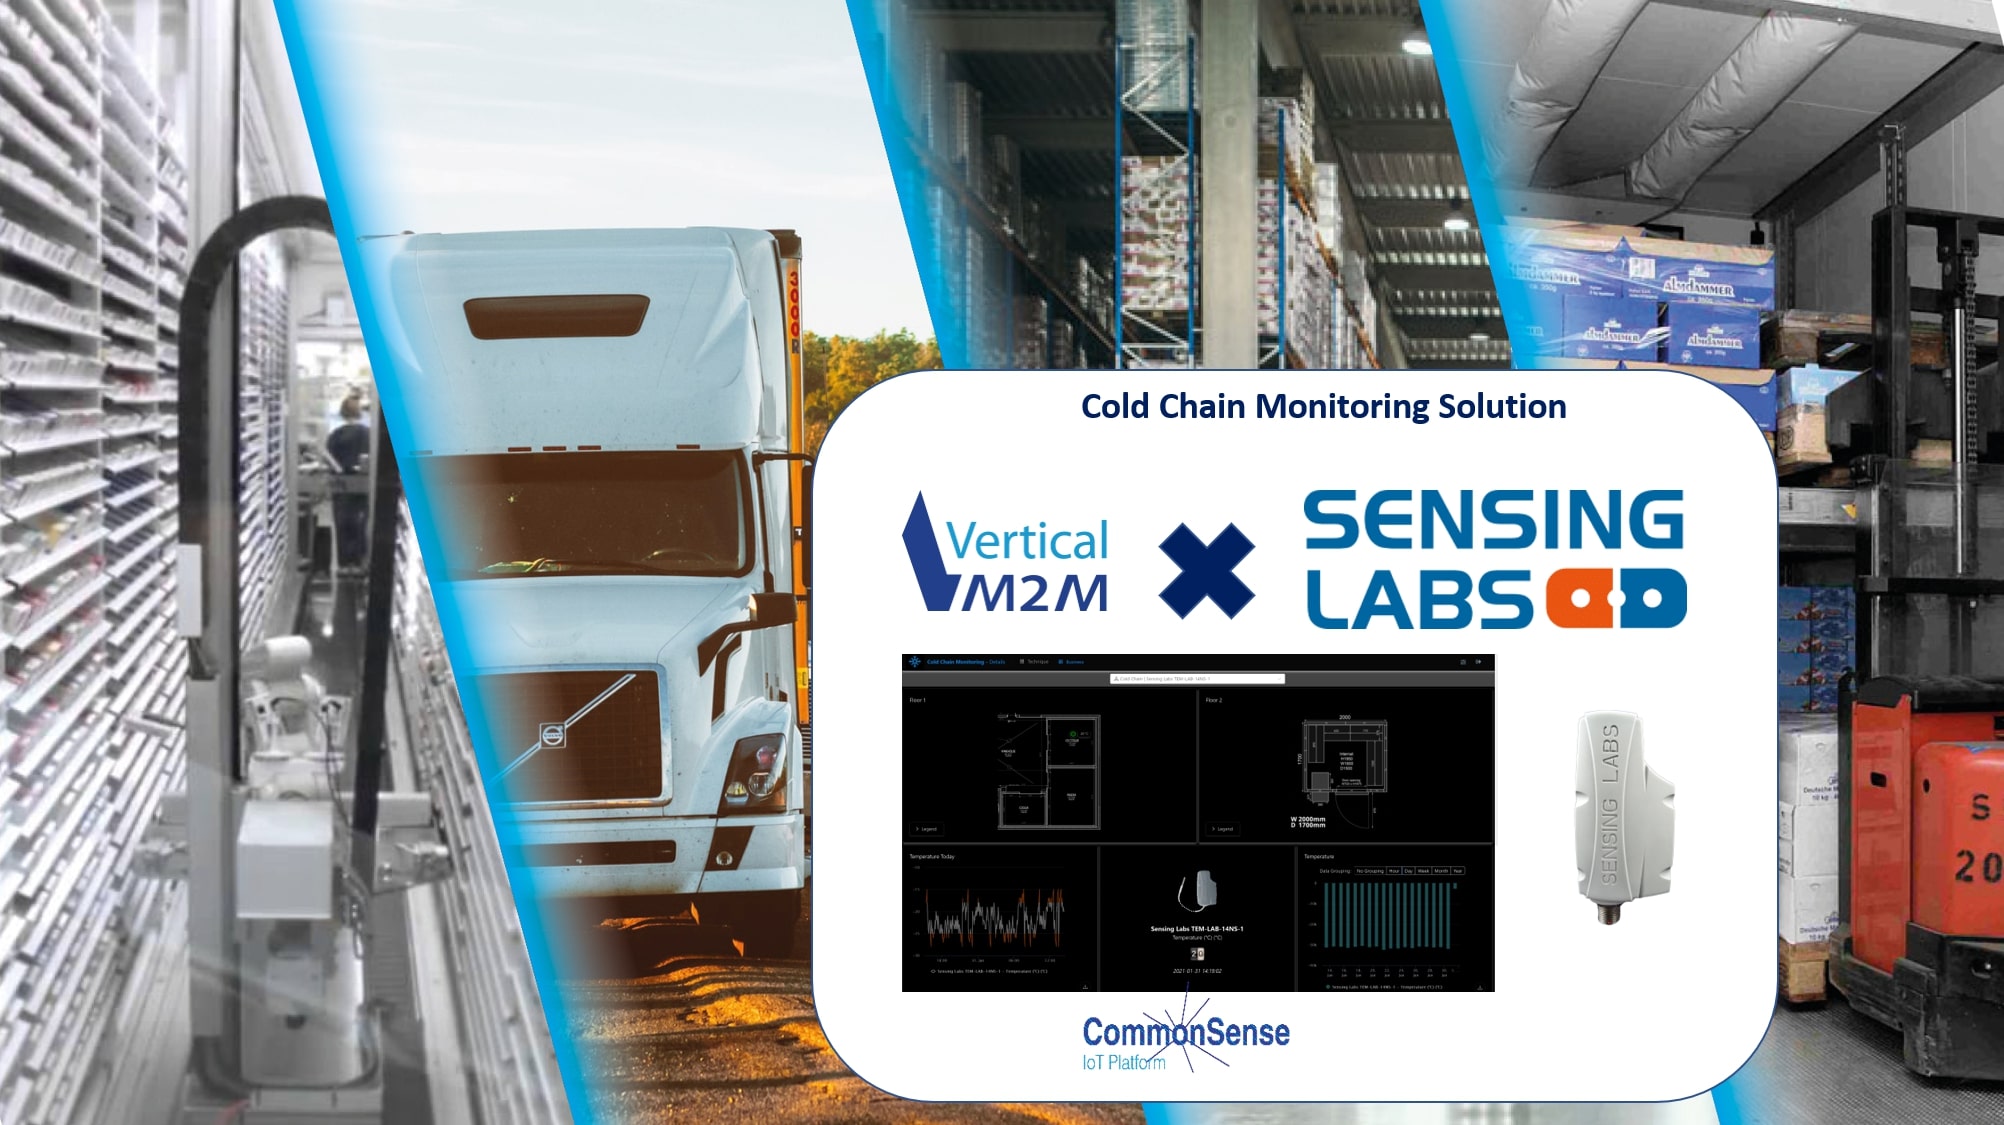 Vertical M2M and SENSING LABS, leading provider of long-range IoT solutions and sensors, team up to deliver an innovative end-to-end cold chain monitoring solution relying on LoRAWAN technologies.